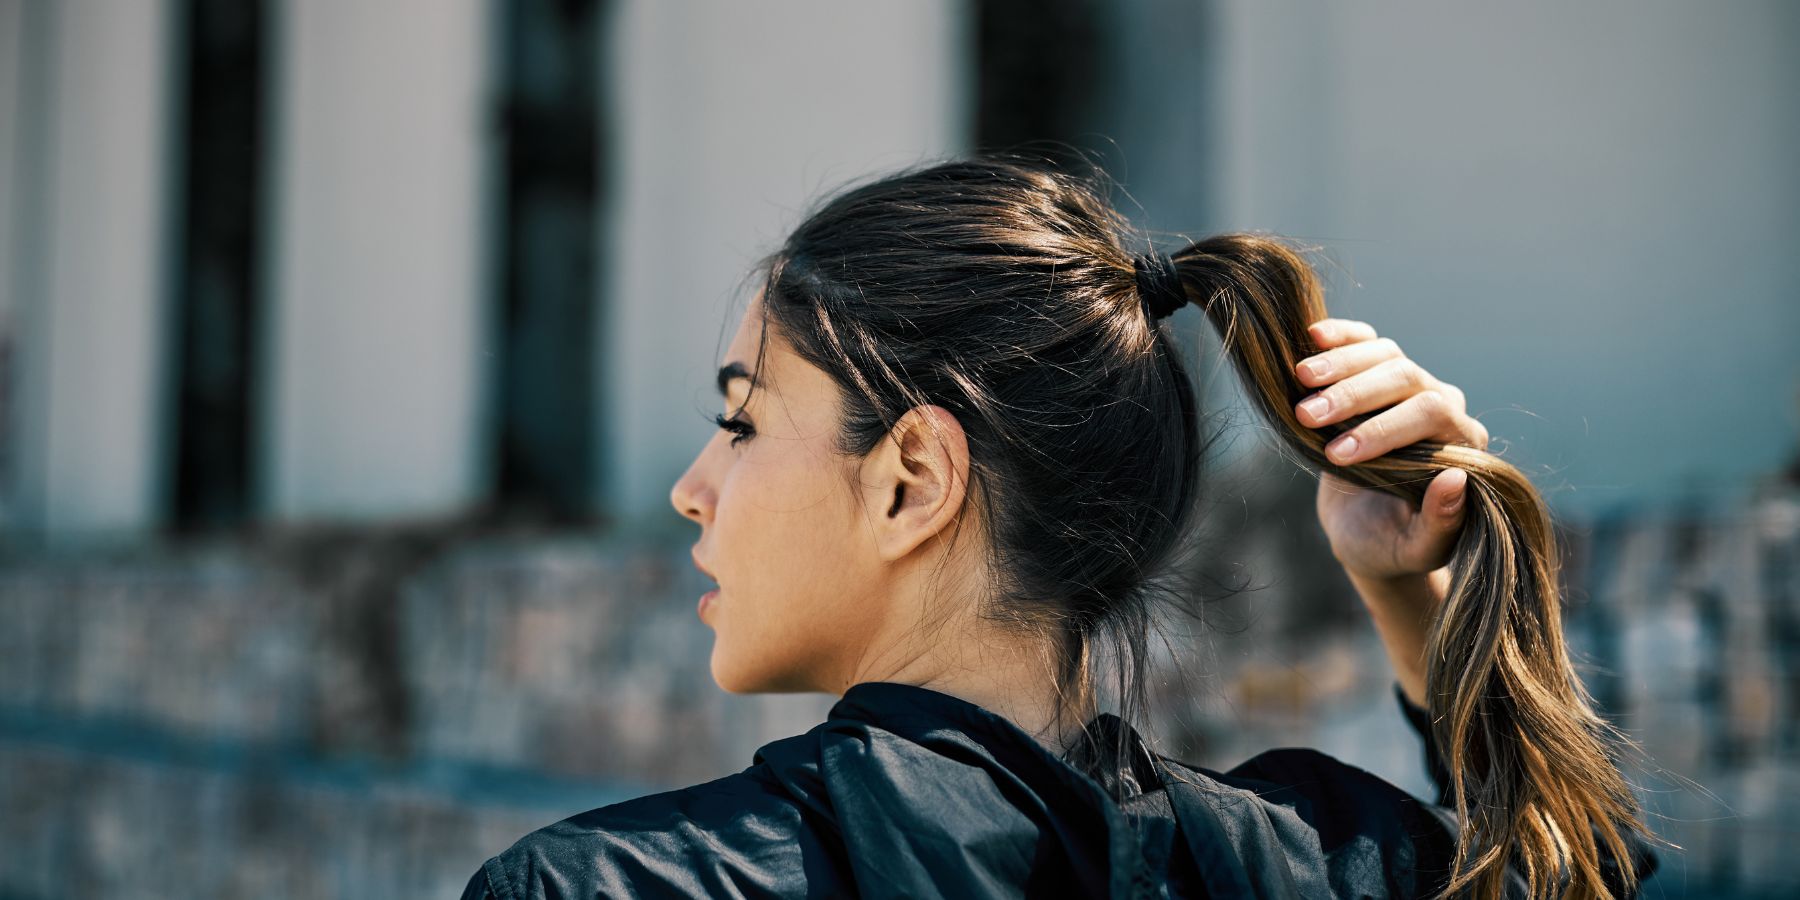 The Stylish and Easy-to-Maintain Hairstyles Every Woman Should Know